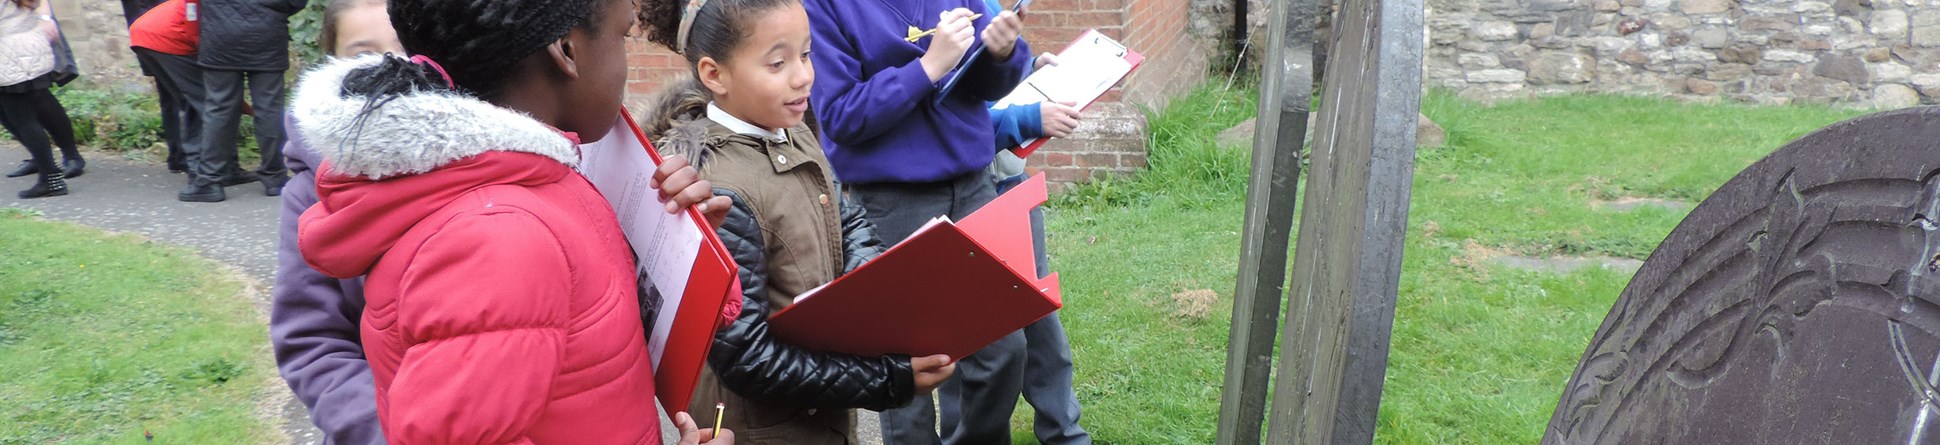 Pupils recording graves in Leicester.